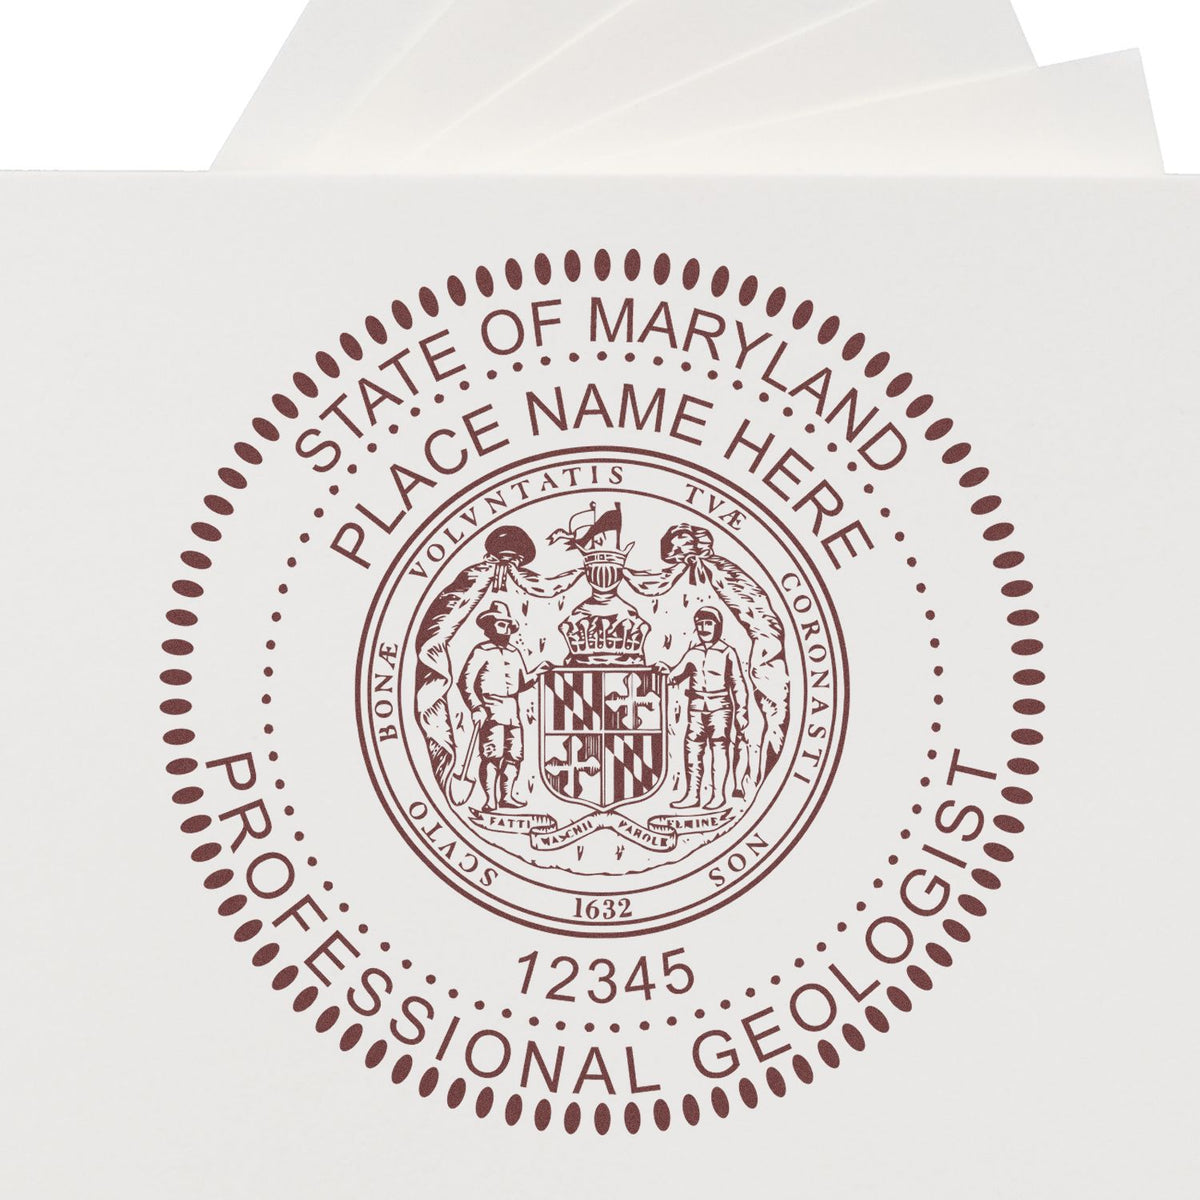 The Self-Inking Maryland Geologist Stamp stamp impression comes to life with a crisp, detailed image stamped on paper - showcasing true professional quality.